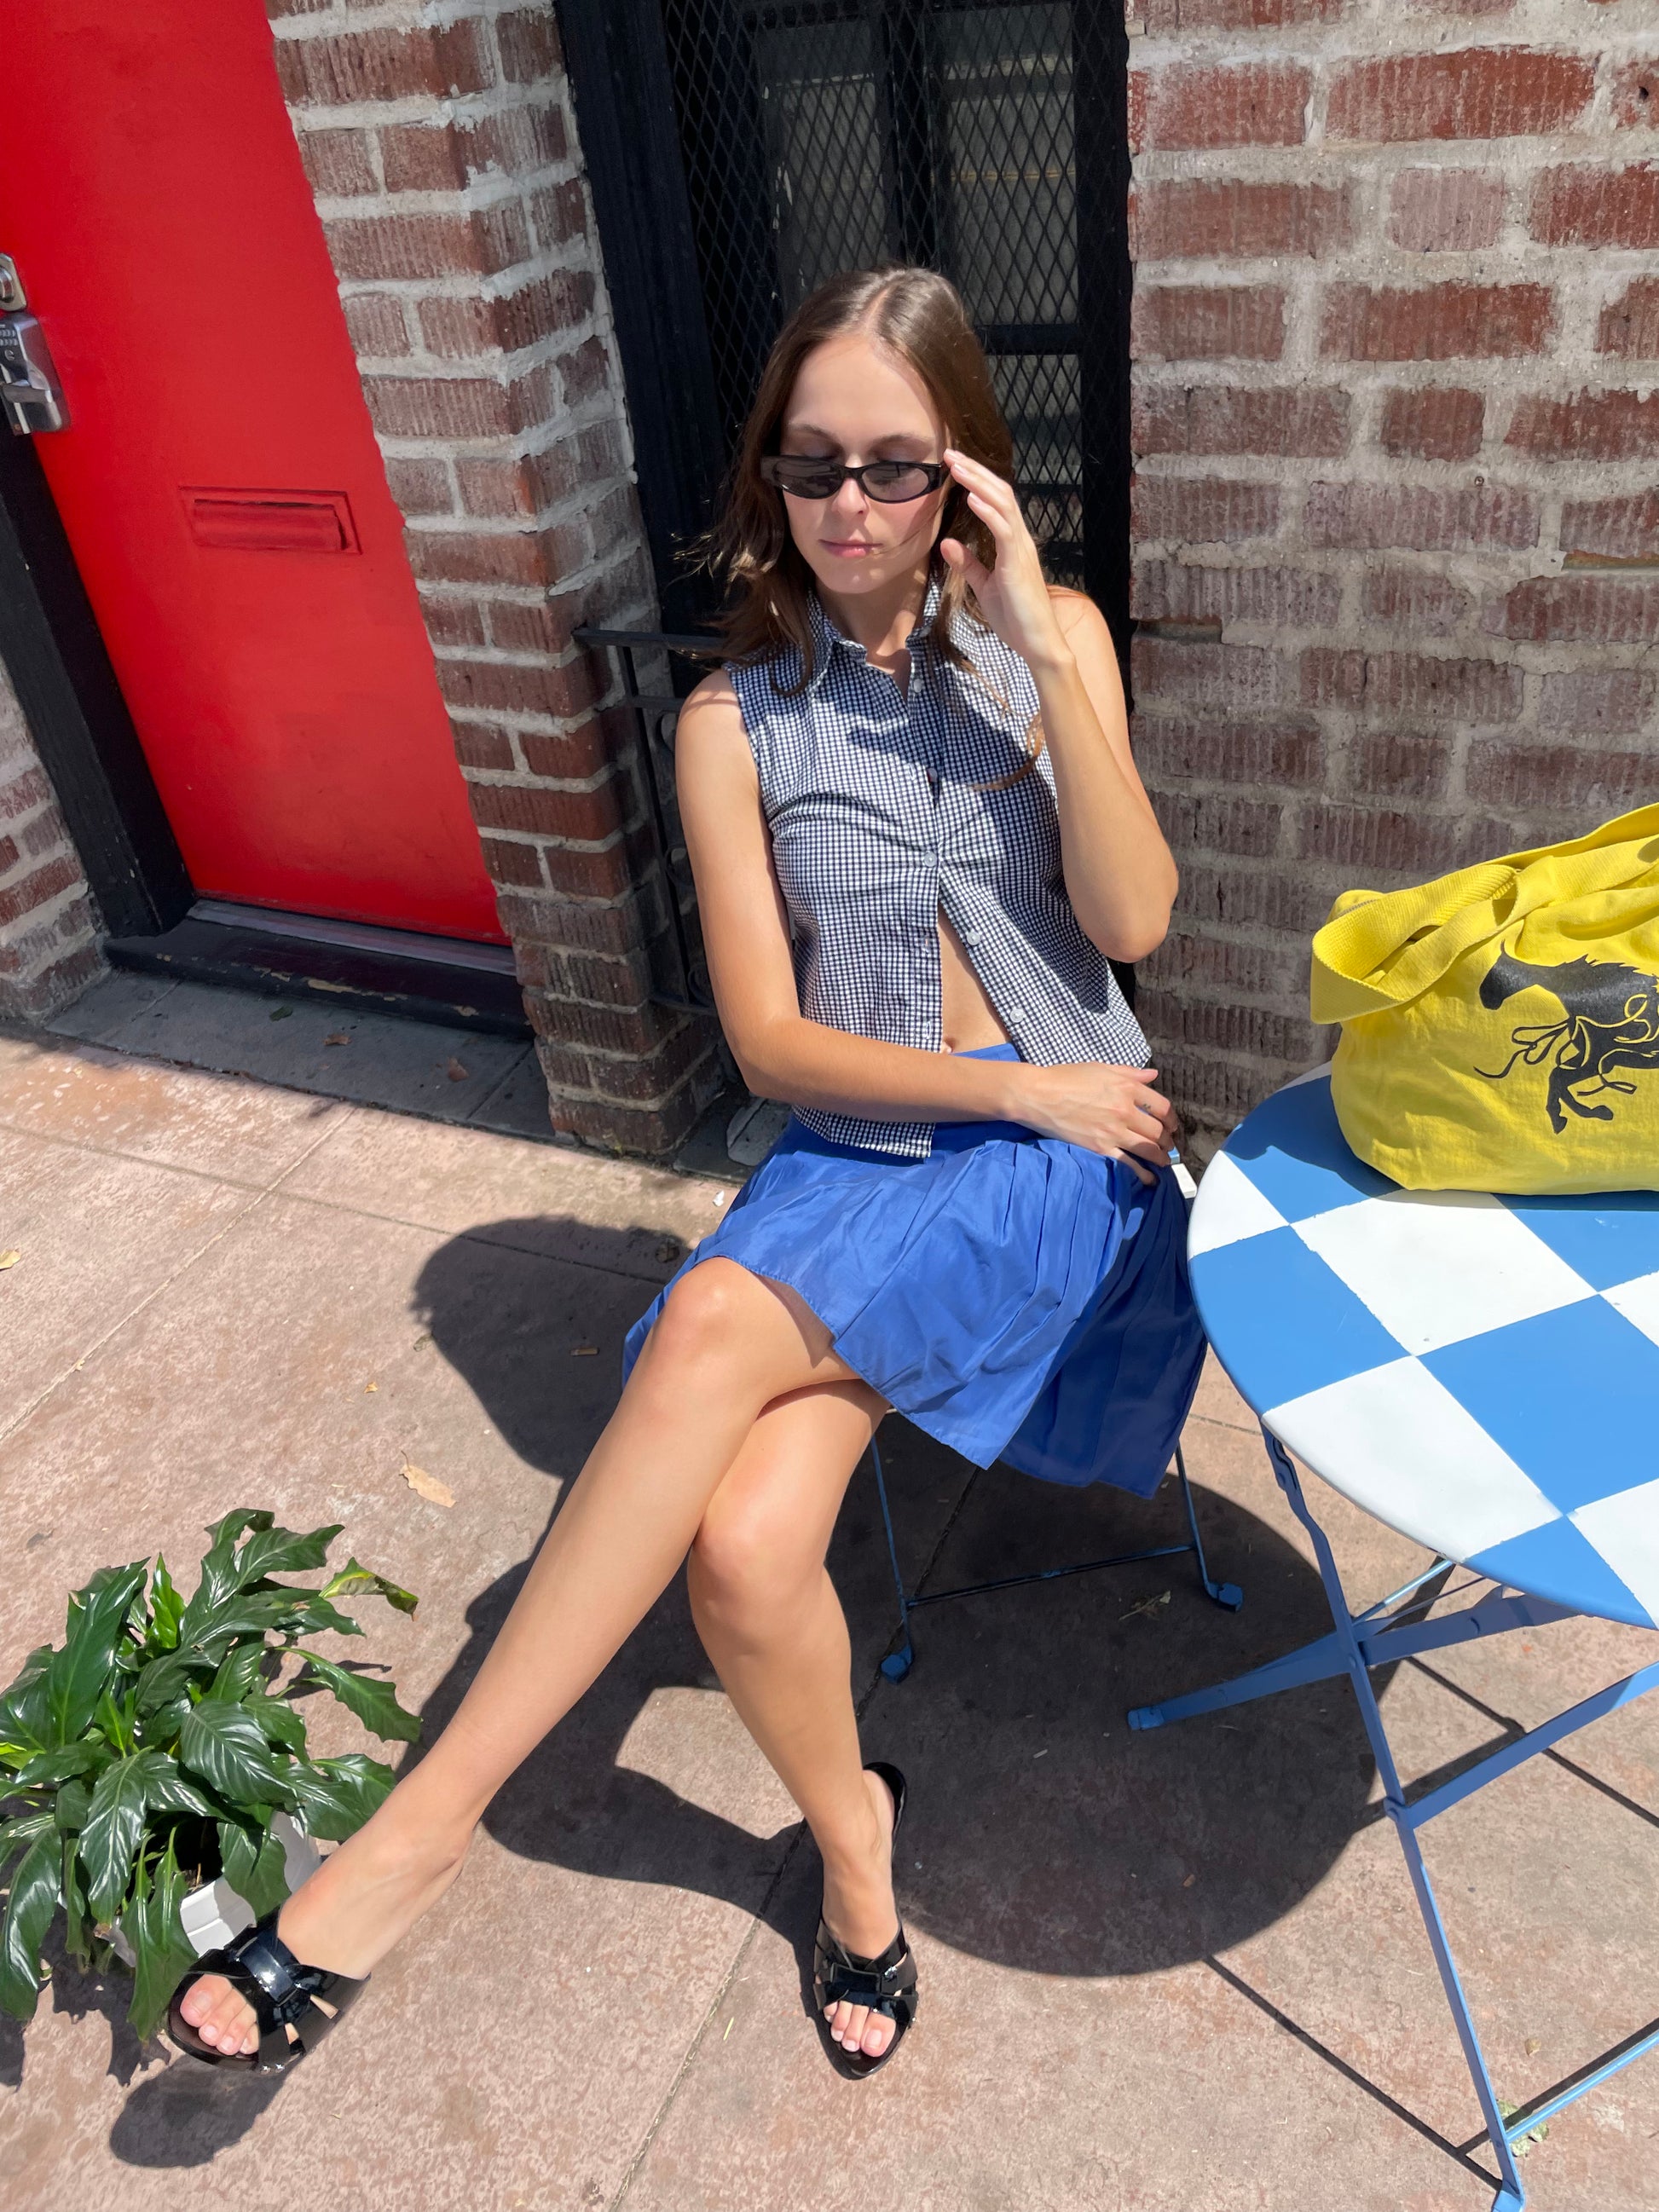 girl in blue skirt and checkered top